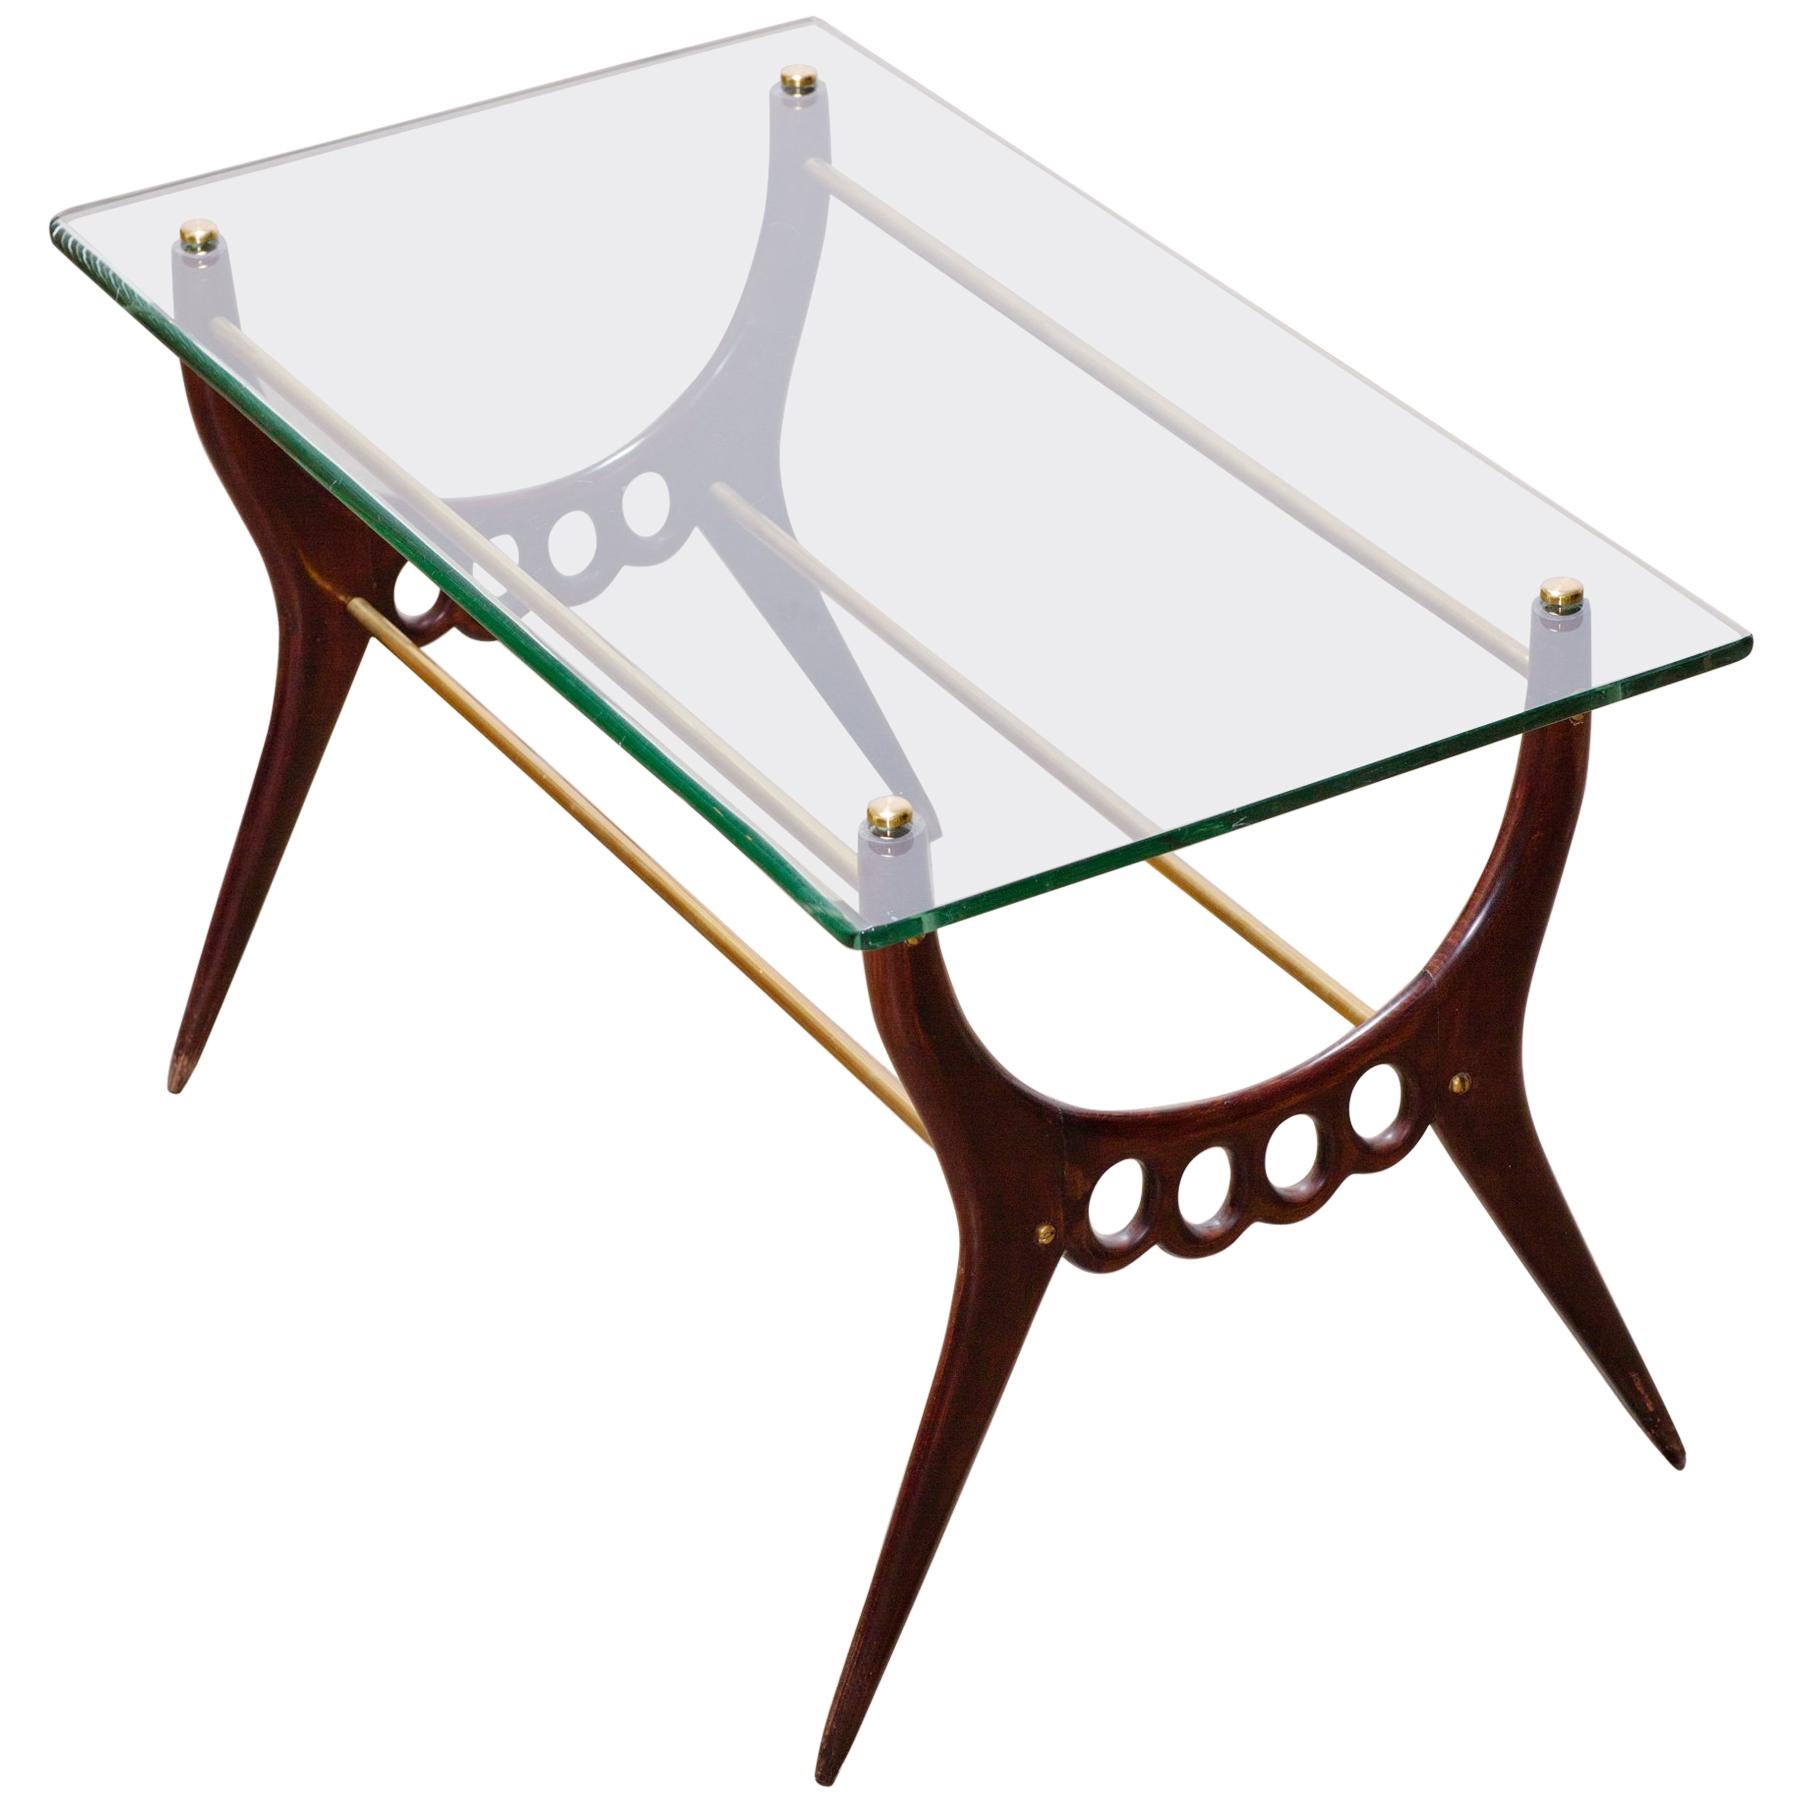 Midcentury Design Coffee Table with Glass Top, Brass Elements by Cesare Lacca For Sale